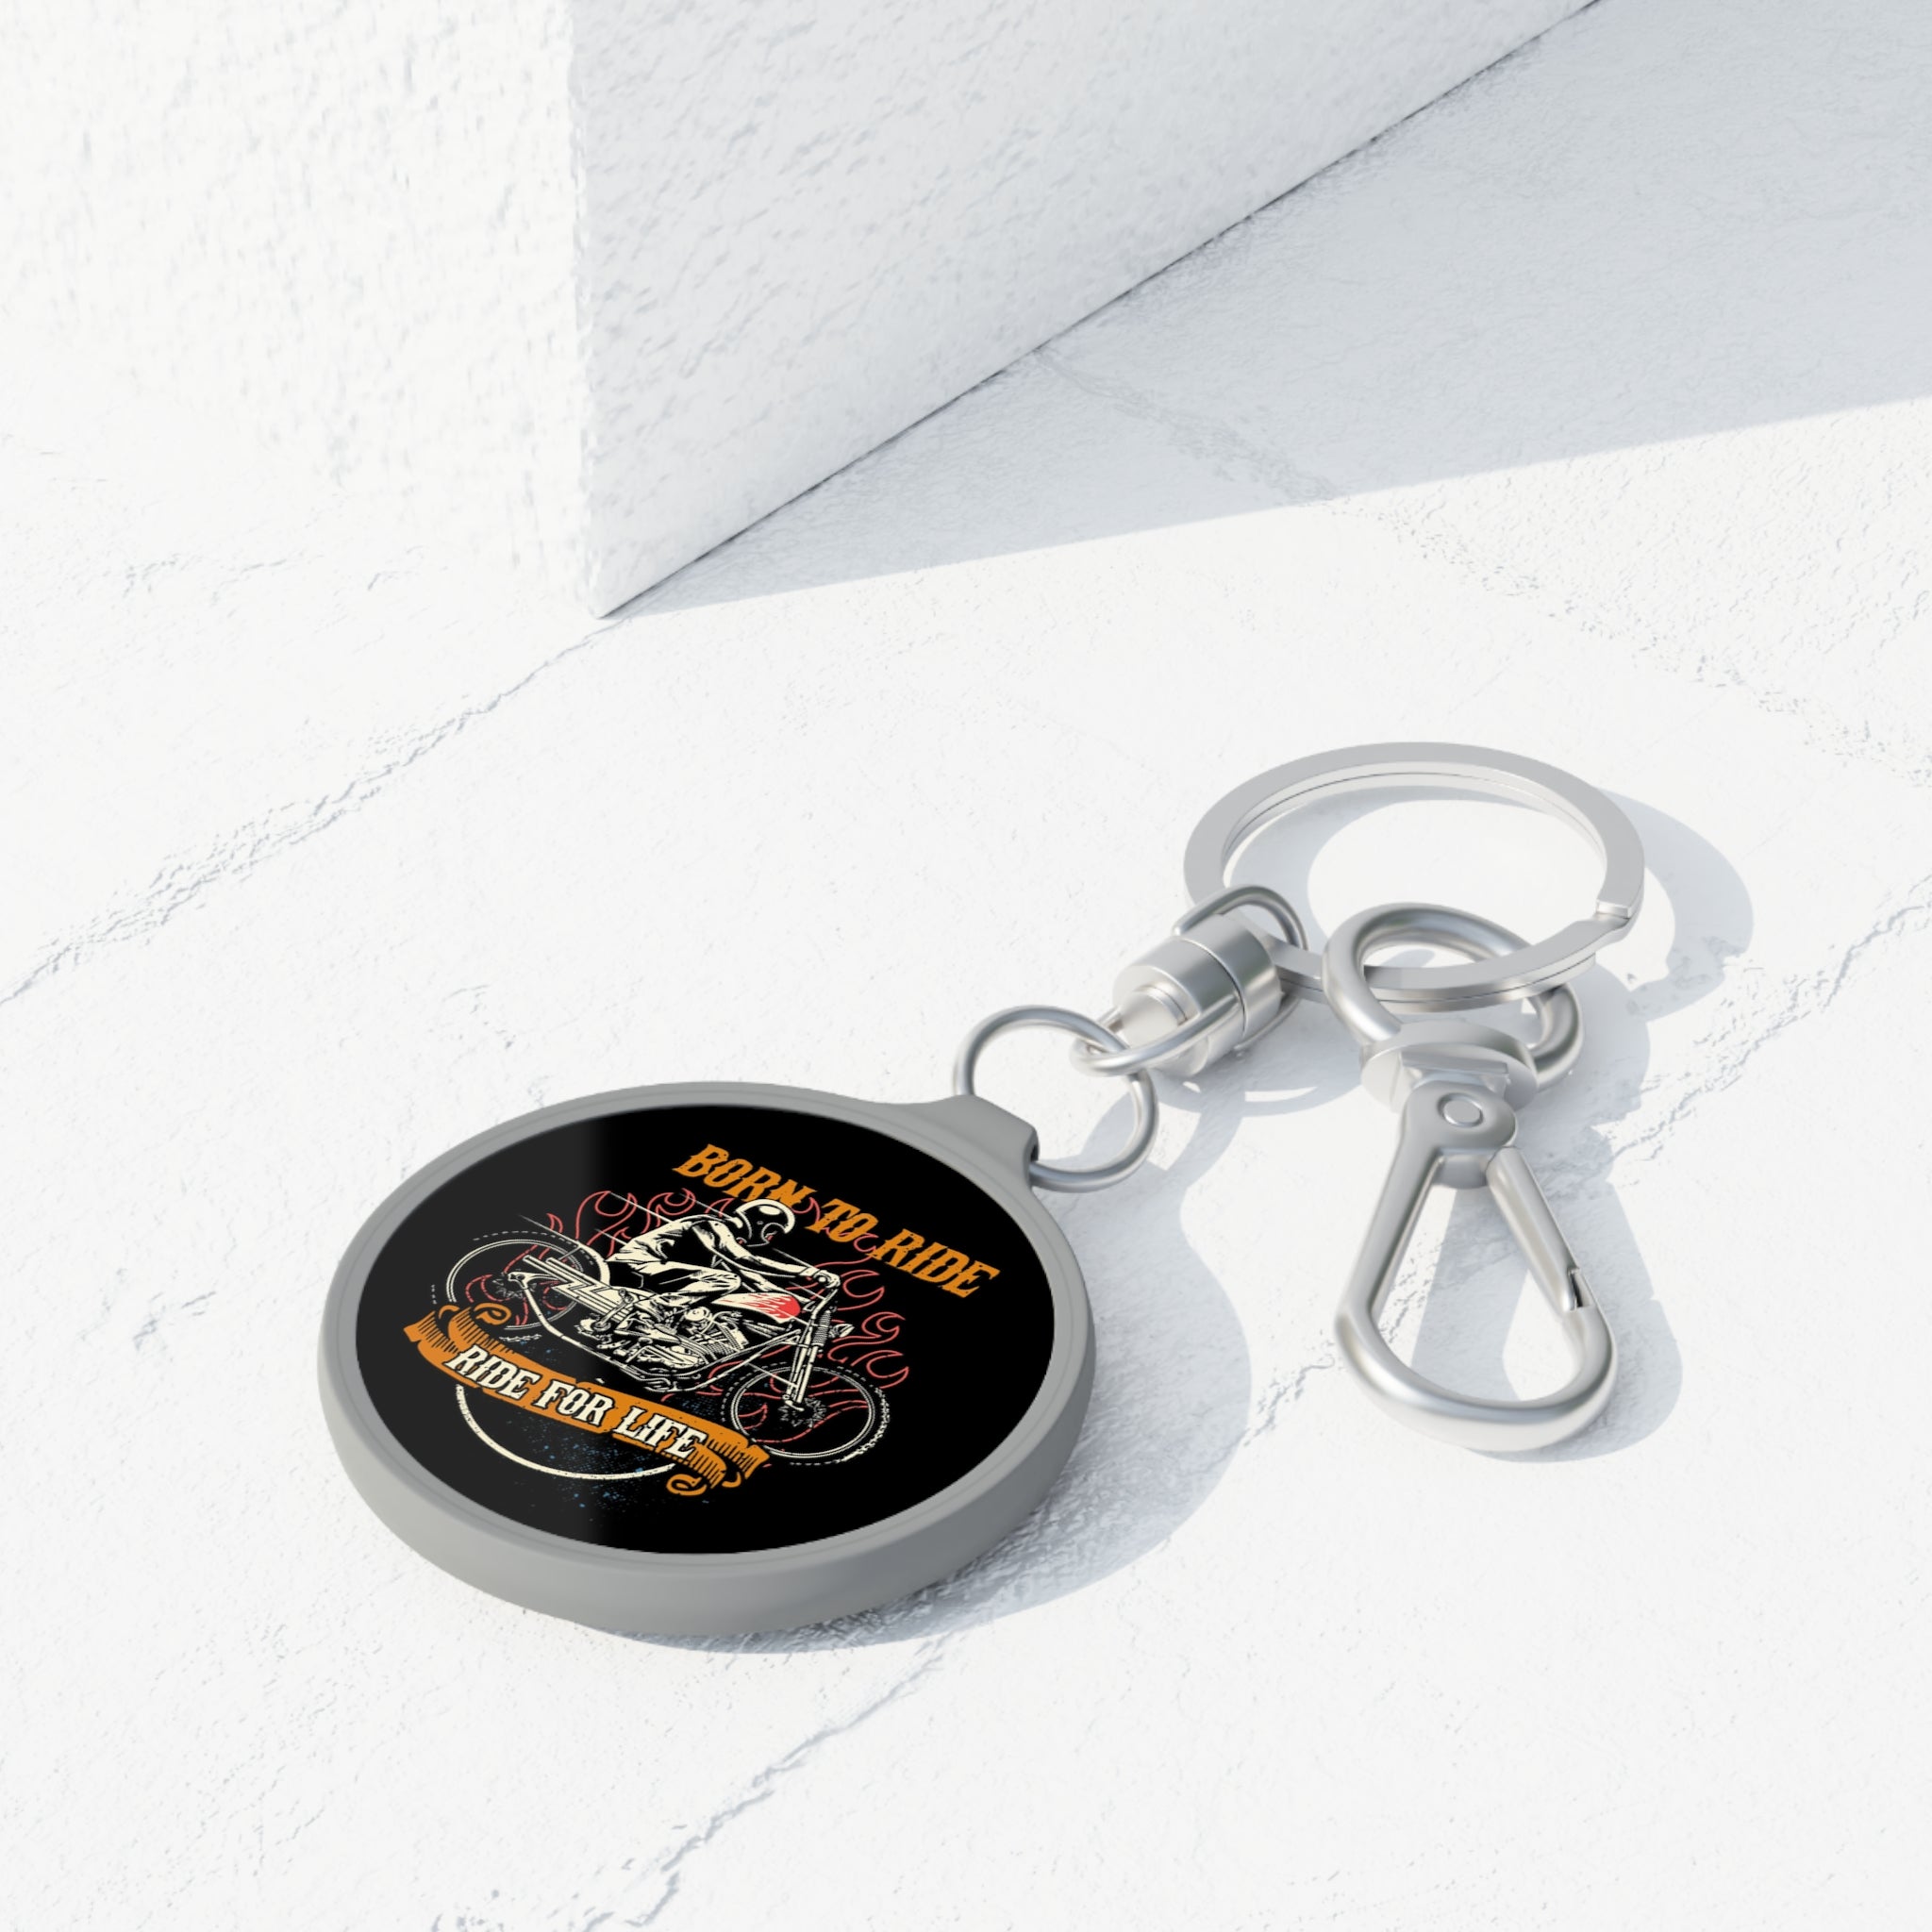 Motorcycle Keyring tag featuring a motorcycle design, perfect for motorcycle enthusiasts and riders.